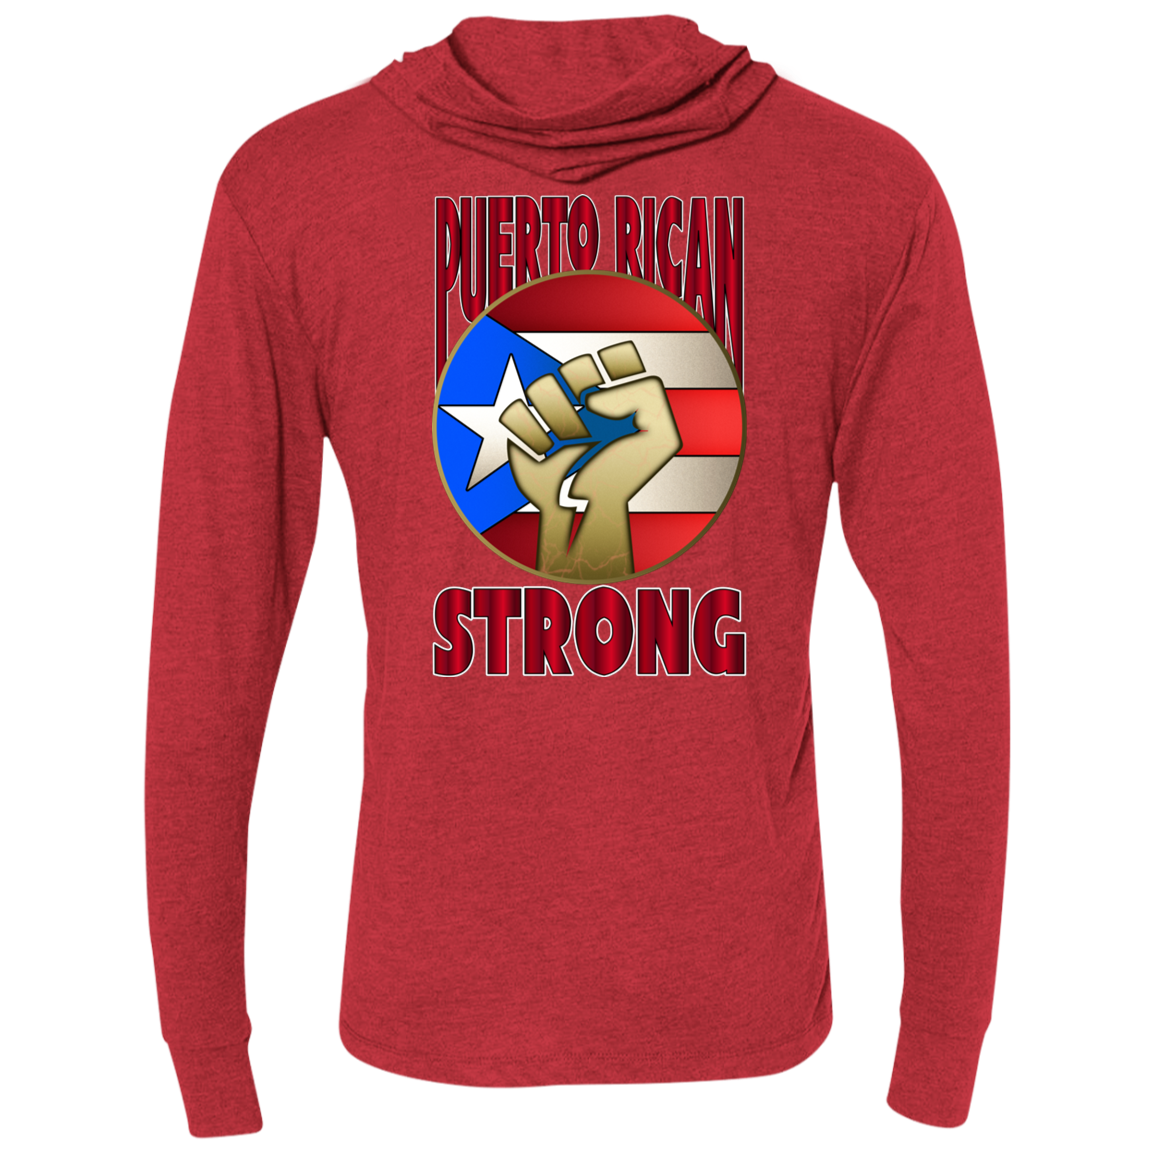 Puerto Rican Strong Unisex  Hooded T-Shirt - Puerto Rican Pride